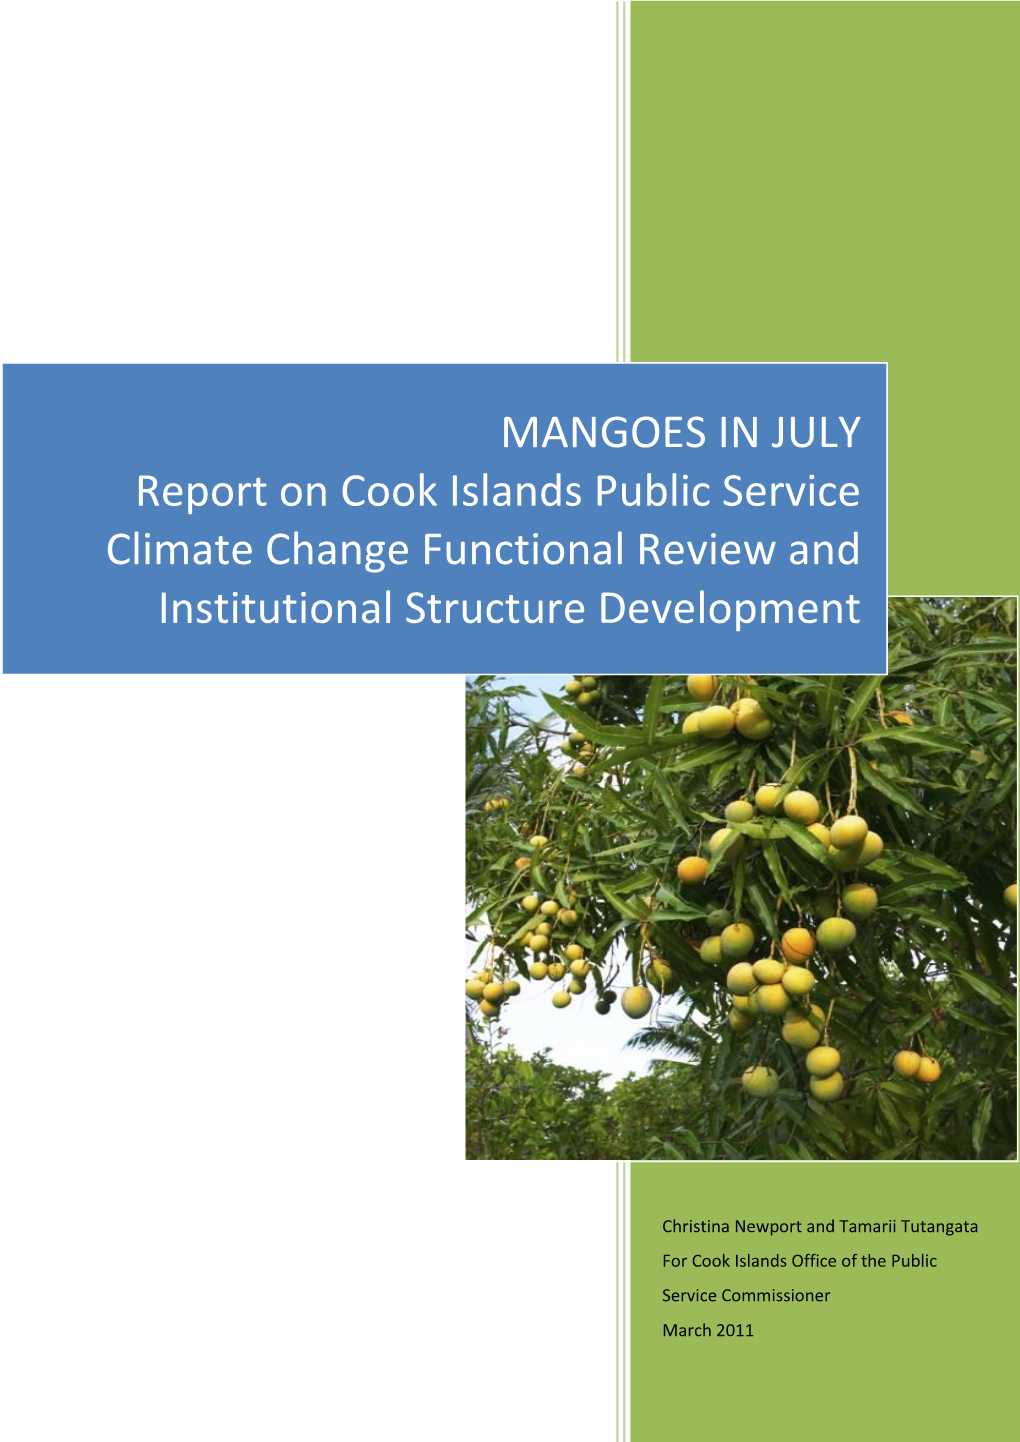 MANGOES in JULY Report on Cook Islands Public Service Climate Change Functional Review and Institutional Structure Development